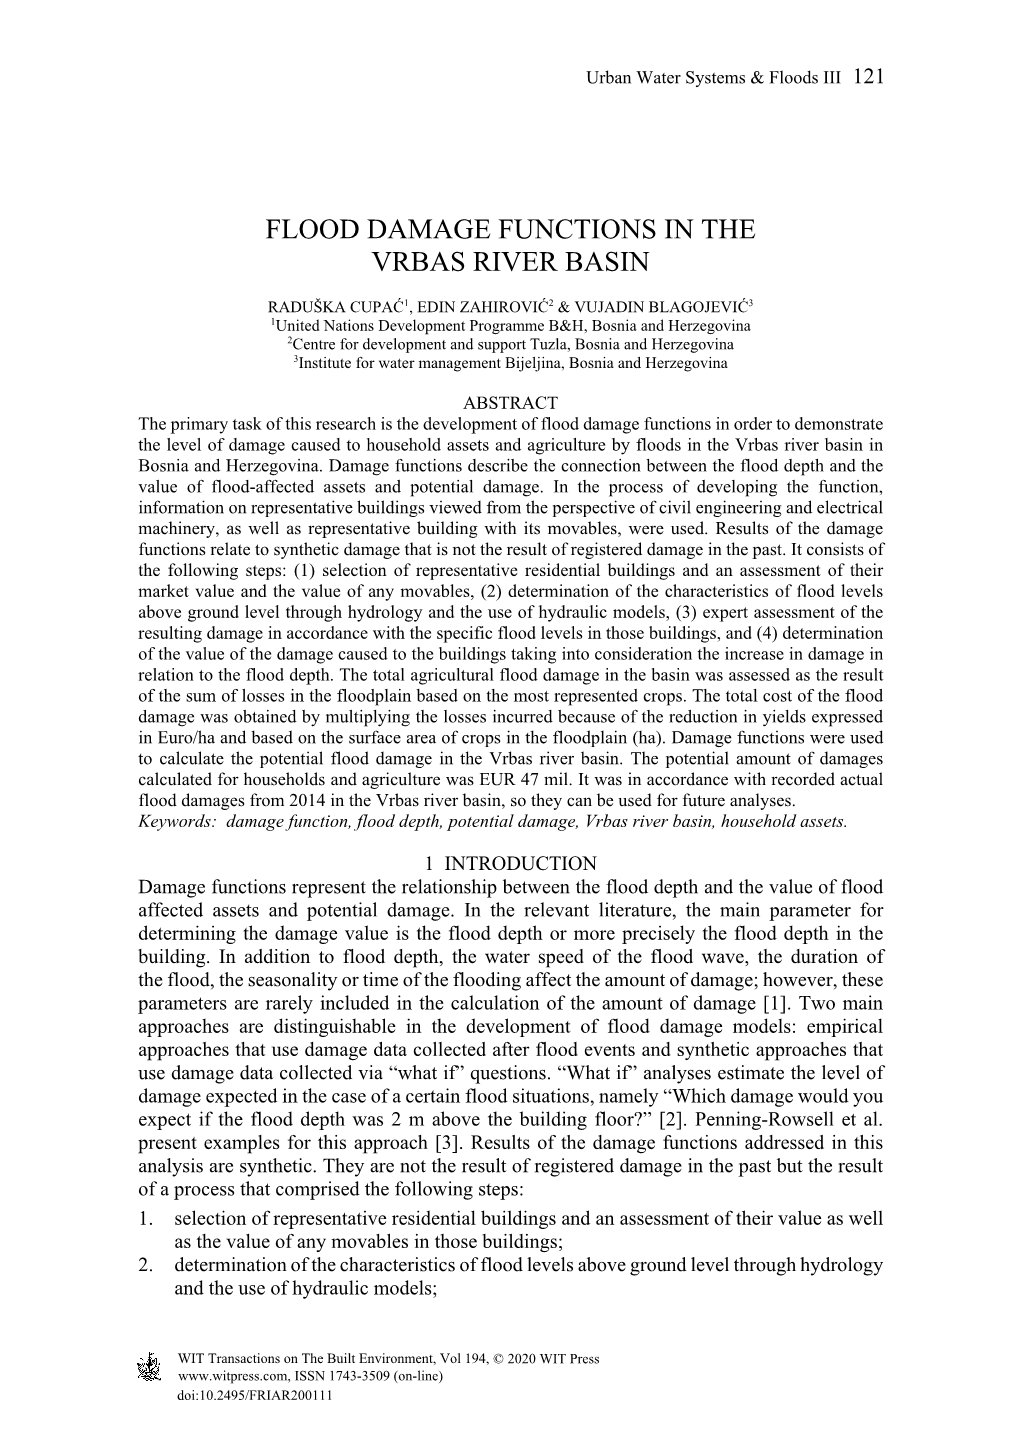 Flood Damage Functions in the Vrbas River Basin